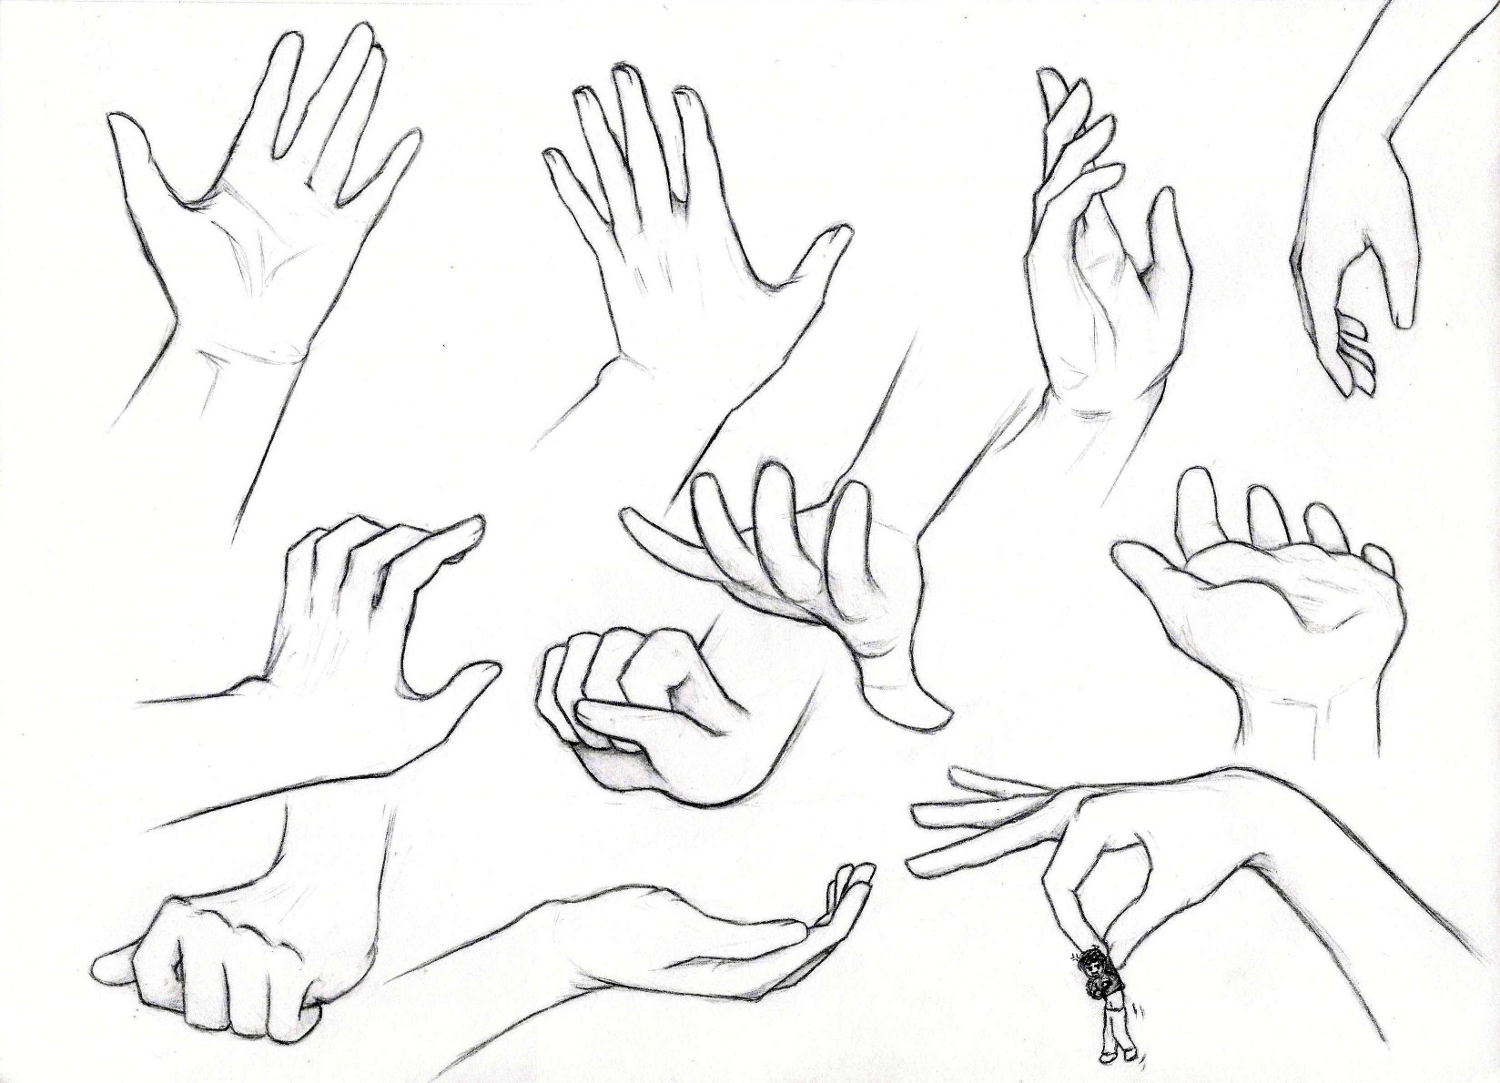 Female Hands Drawing At Getdrawings Free Download 2 draw 5 circles on the palm where each finger. getdrawings com